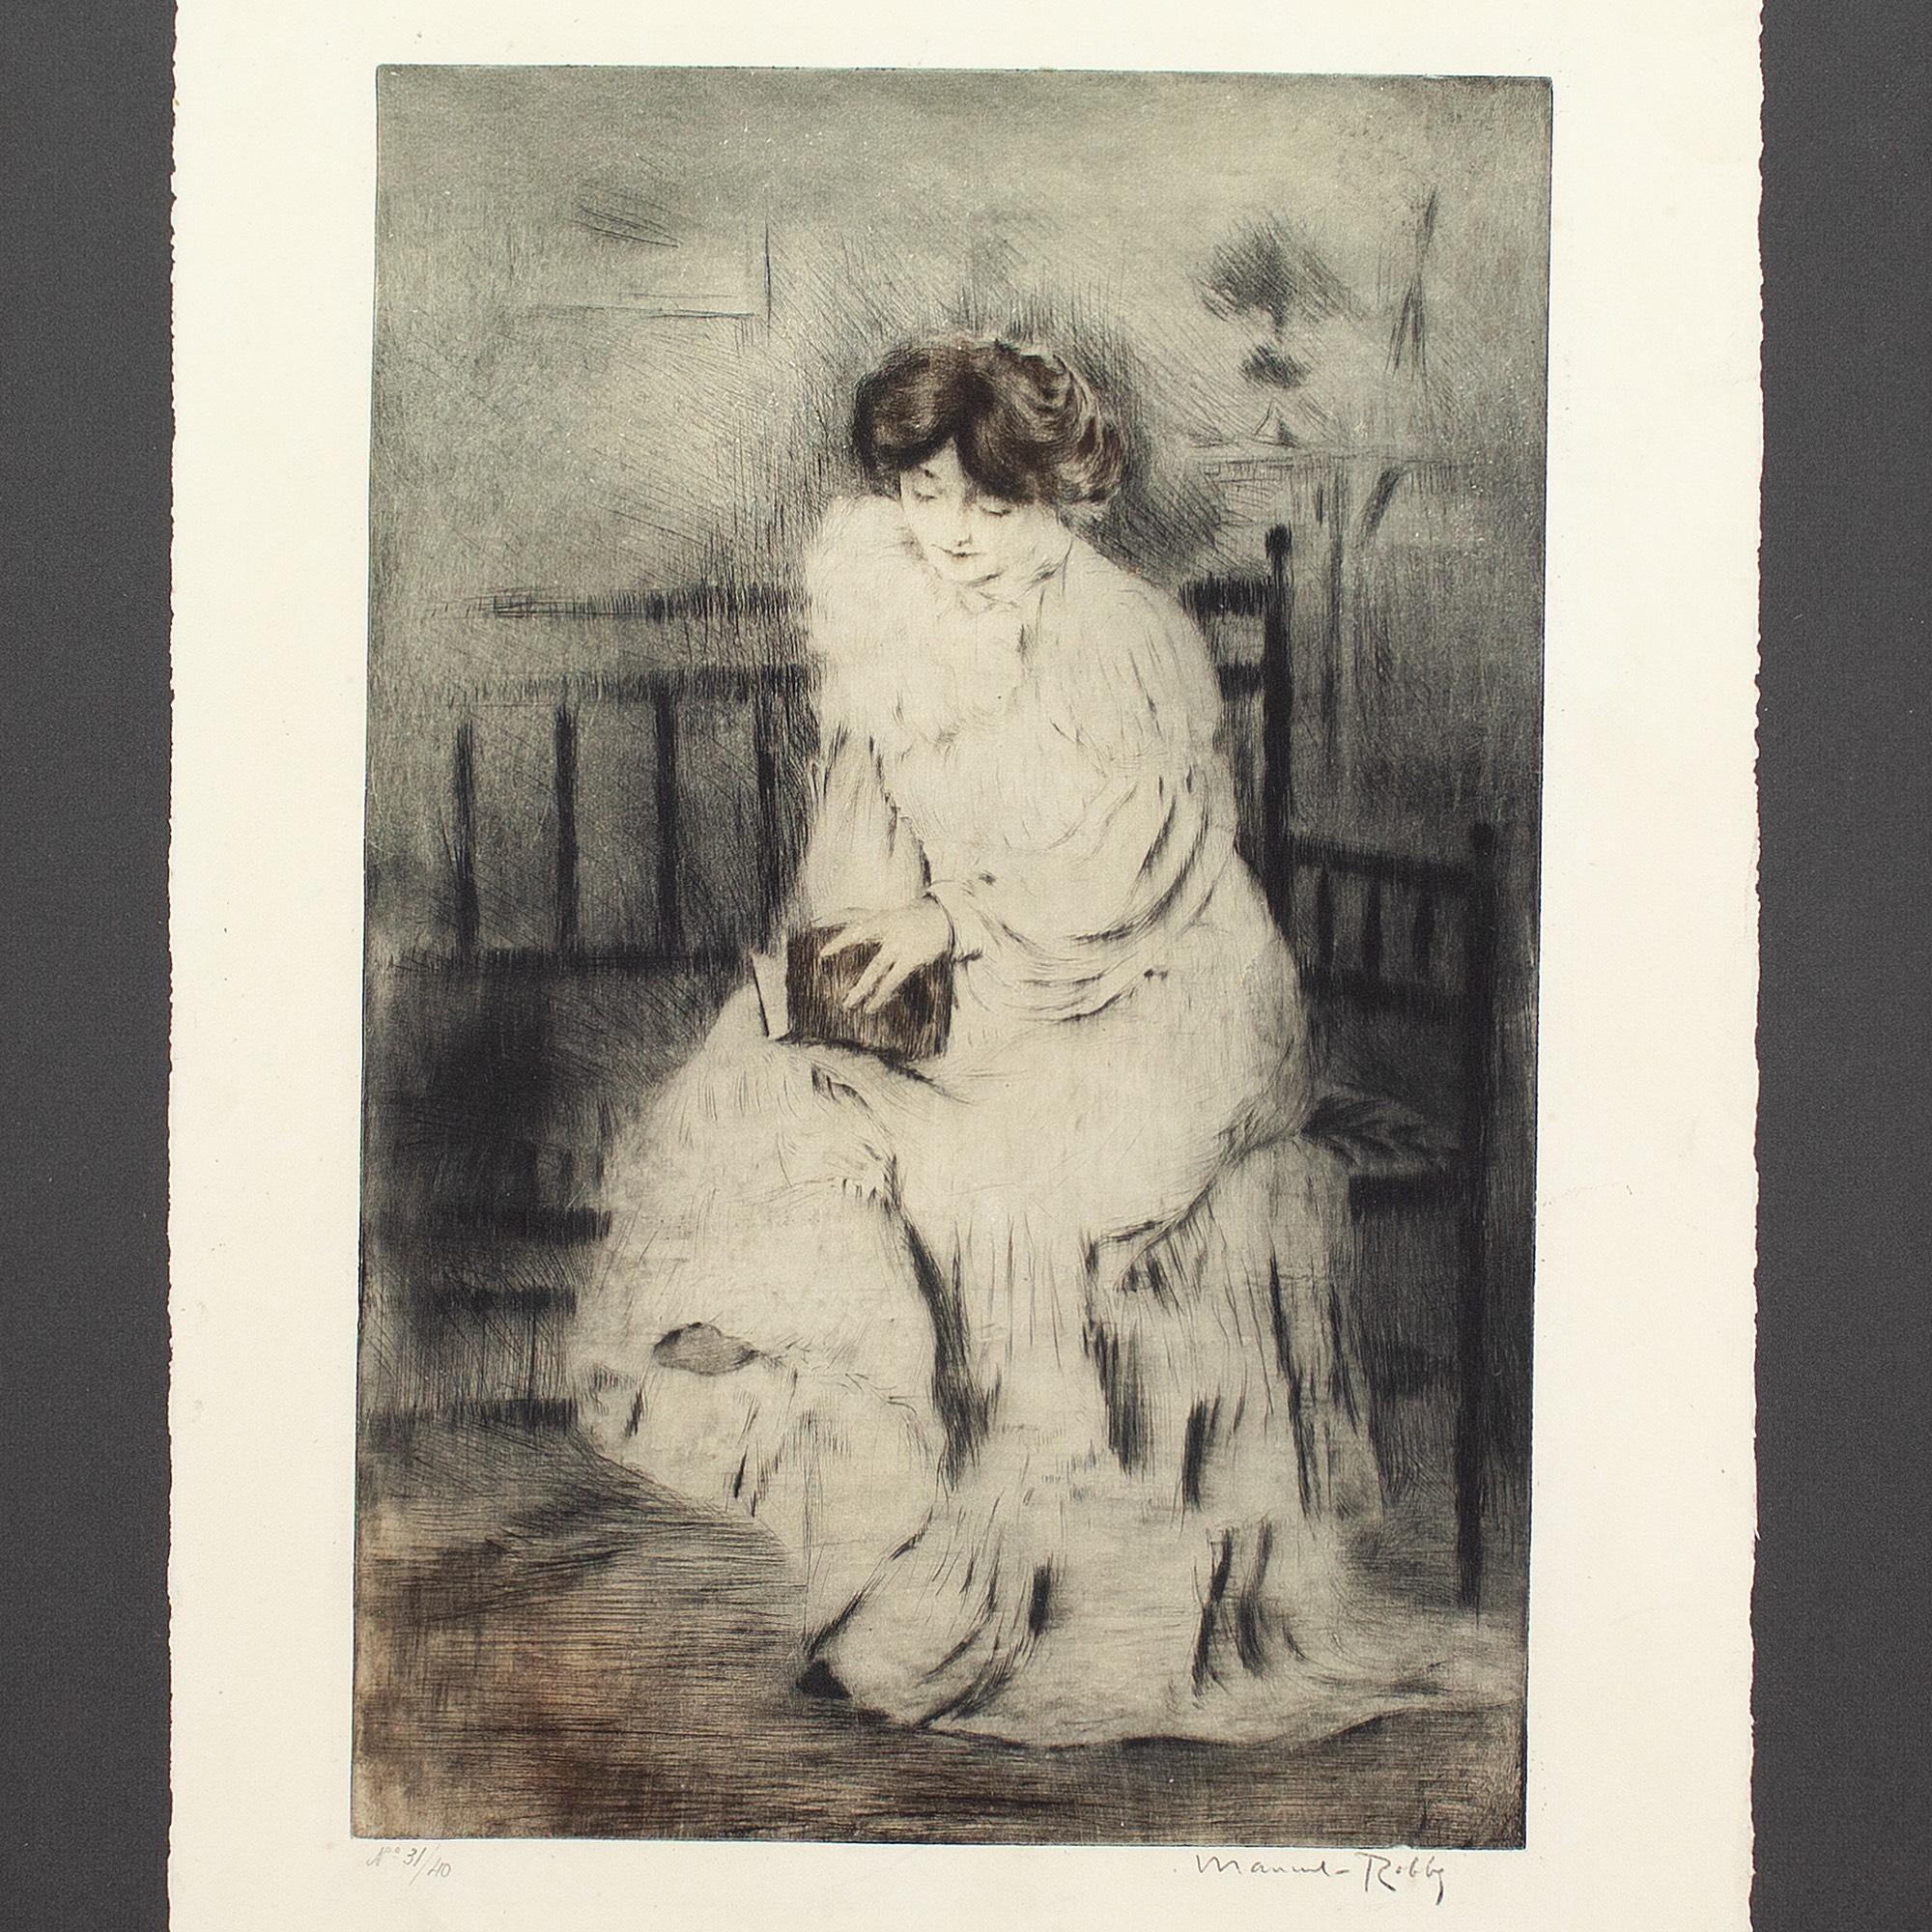 This early 20th-century drypoint etching by eminent French artist Manuel Robbe (1872-1936) depicts a lady reading within the comfort of her own bedroom. It’s a celebration of beauty, escapism, and education.

Perched upon the corner of her bed